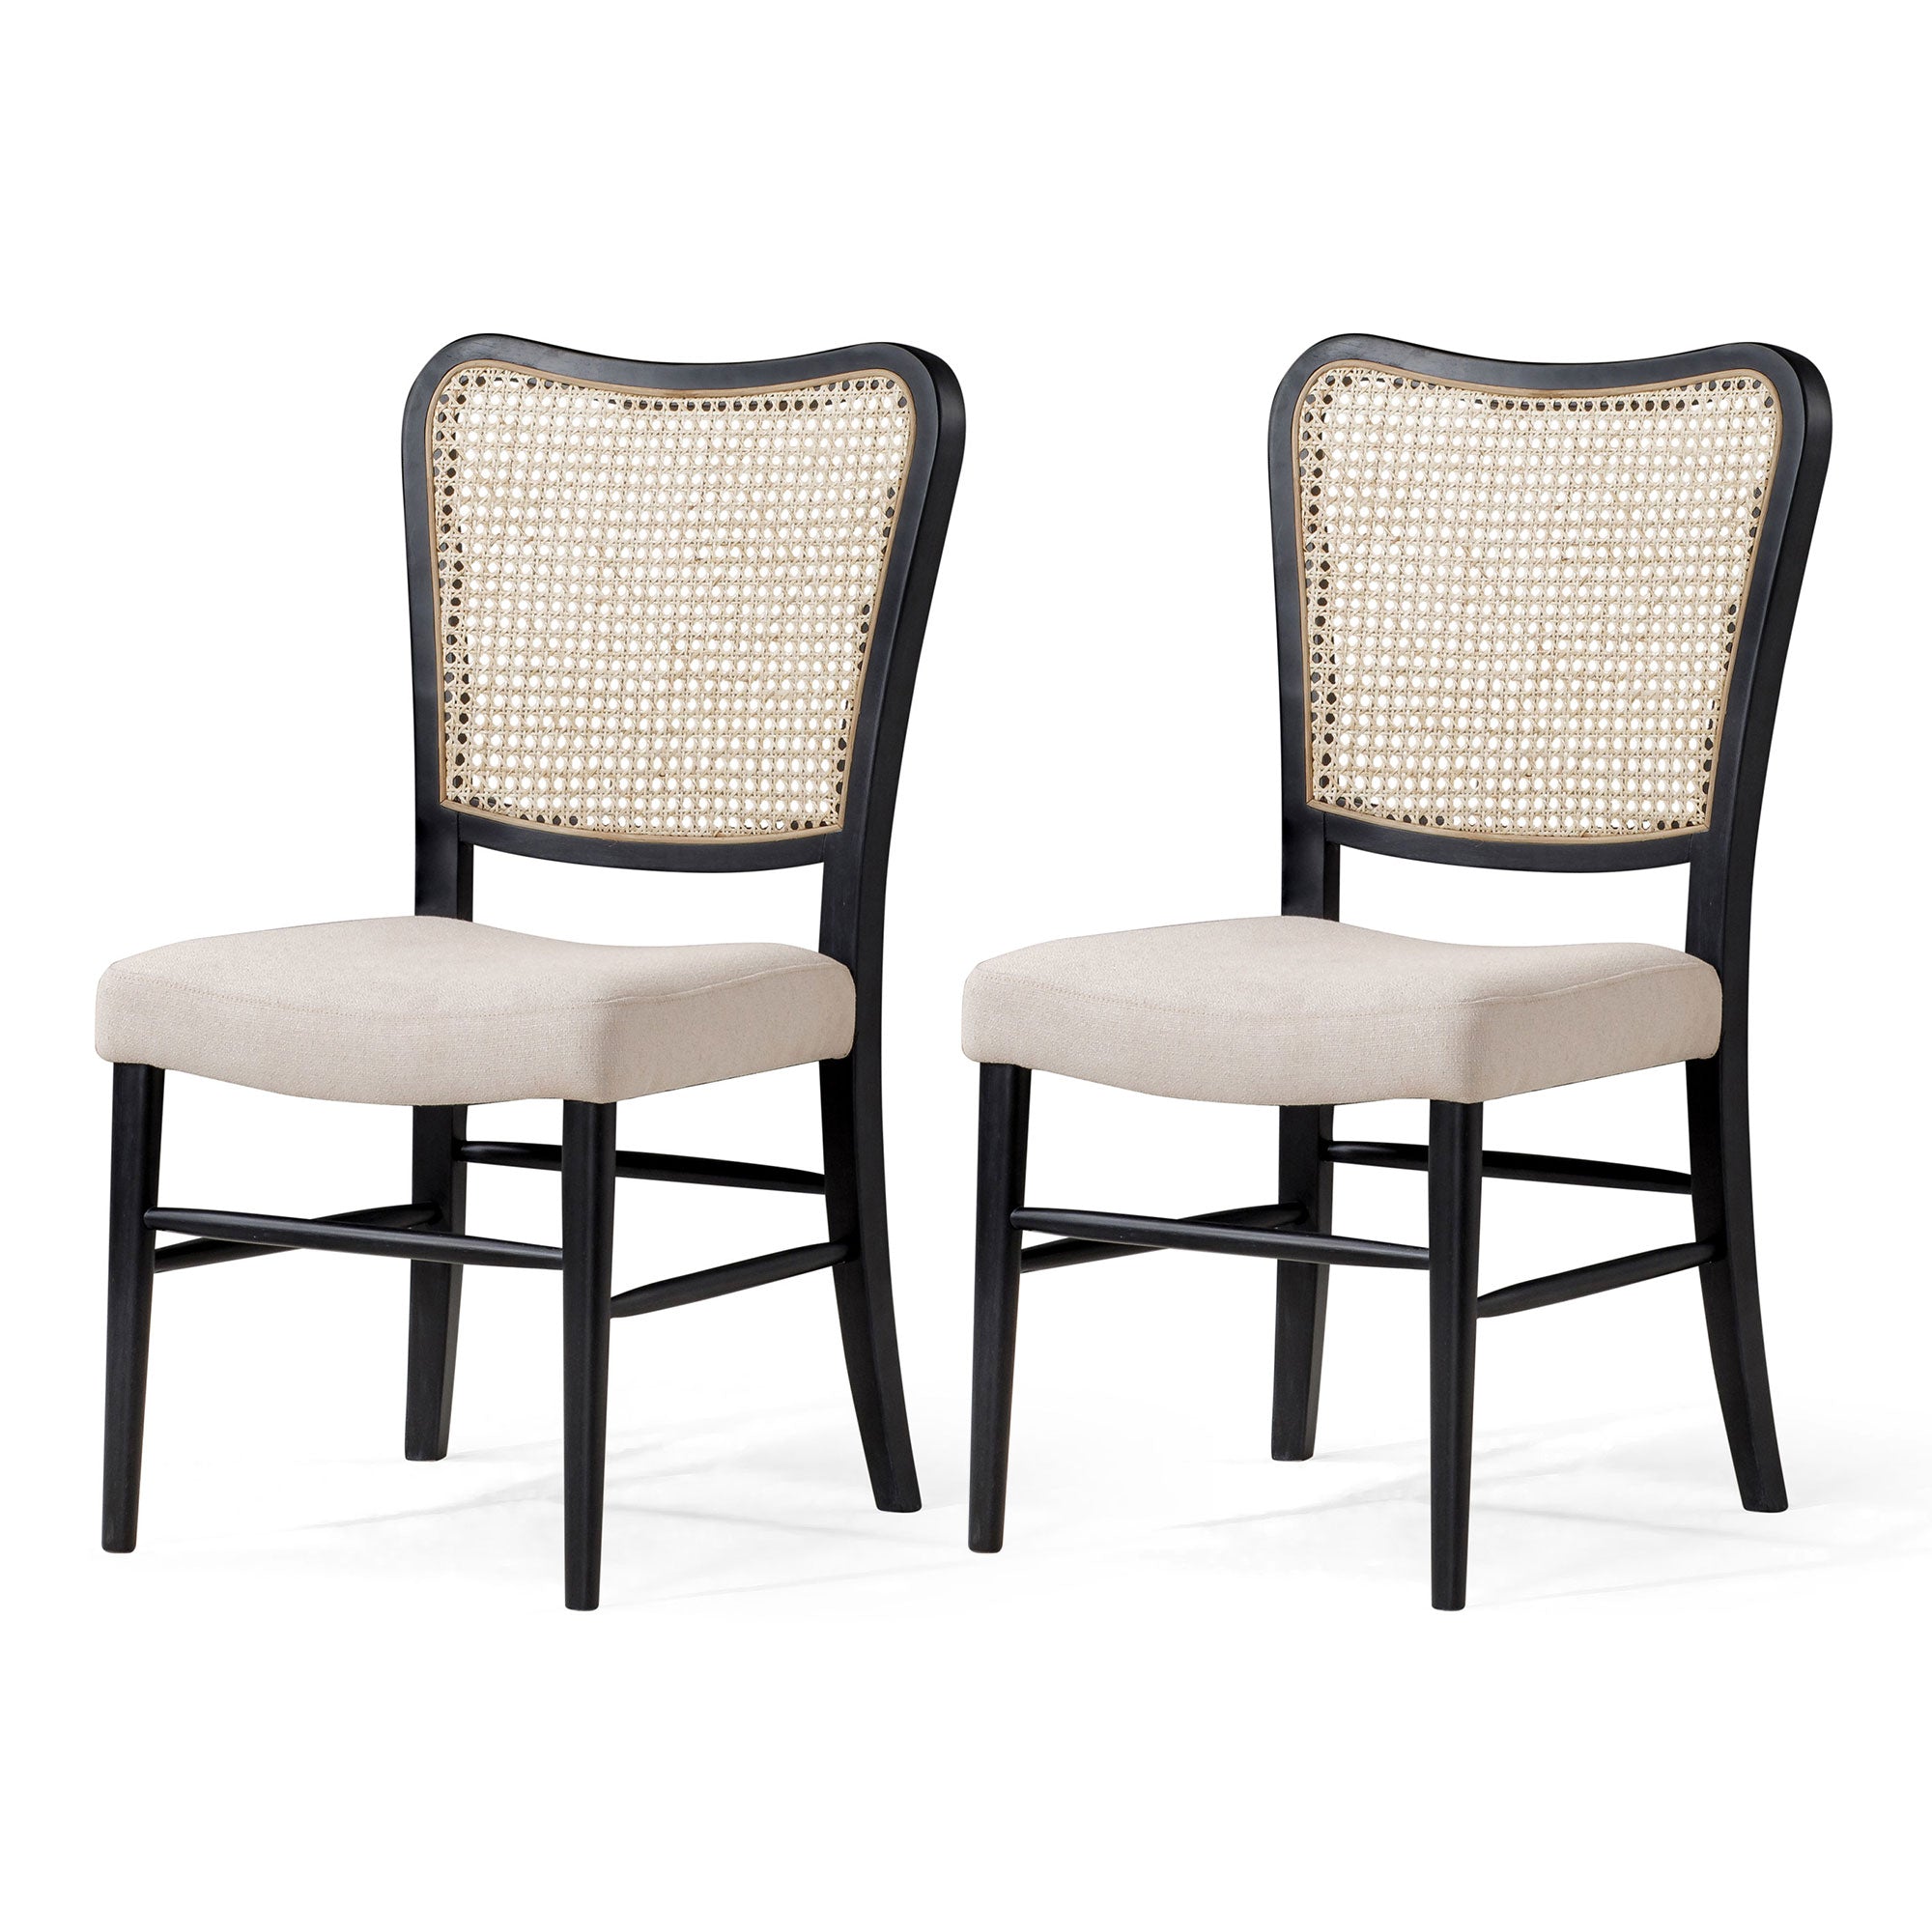 Vera Classical Wooden Dining Chair in Antiqued Black Finish with Dove Weave Fabric Upholstery, Set of 2 in Dining Furniture by Maven Lane